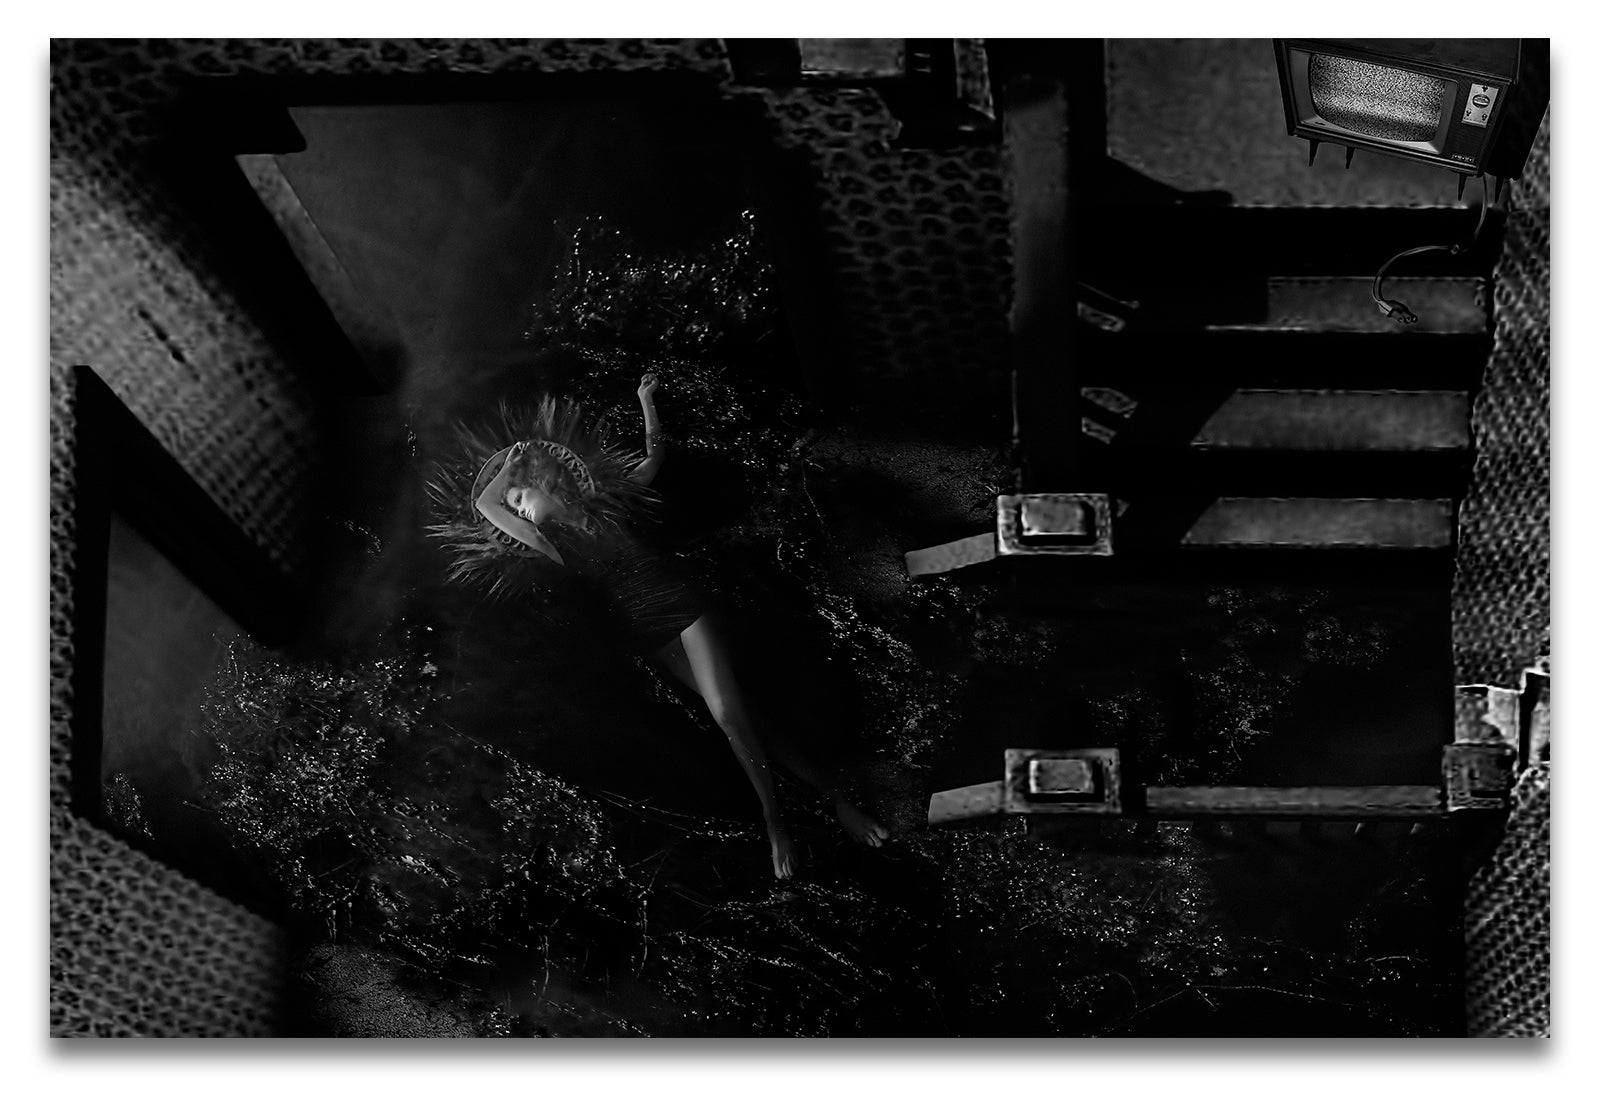 Horizontal Black & White Portrait of a Woman Being Baptized in the Whole First Floor of a House-Metal Print-Aluminum Print